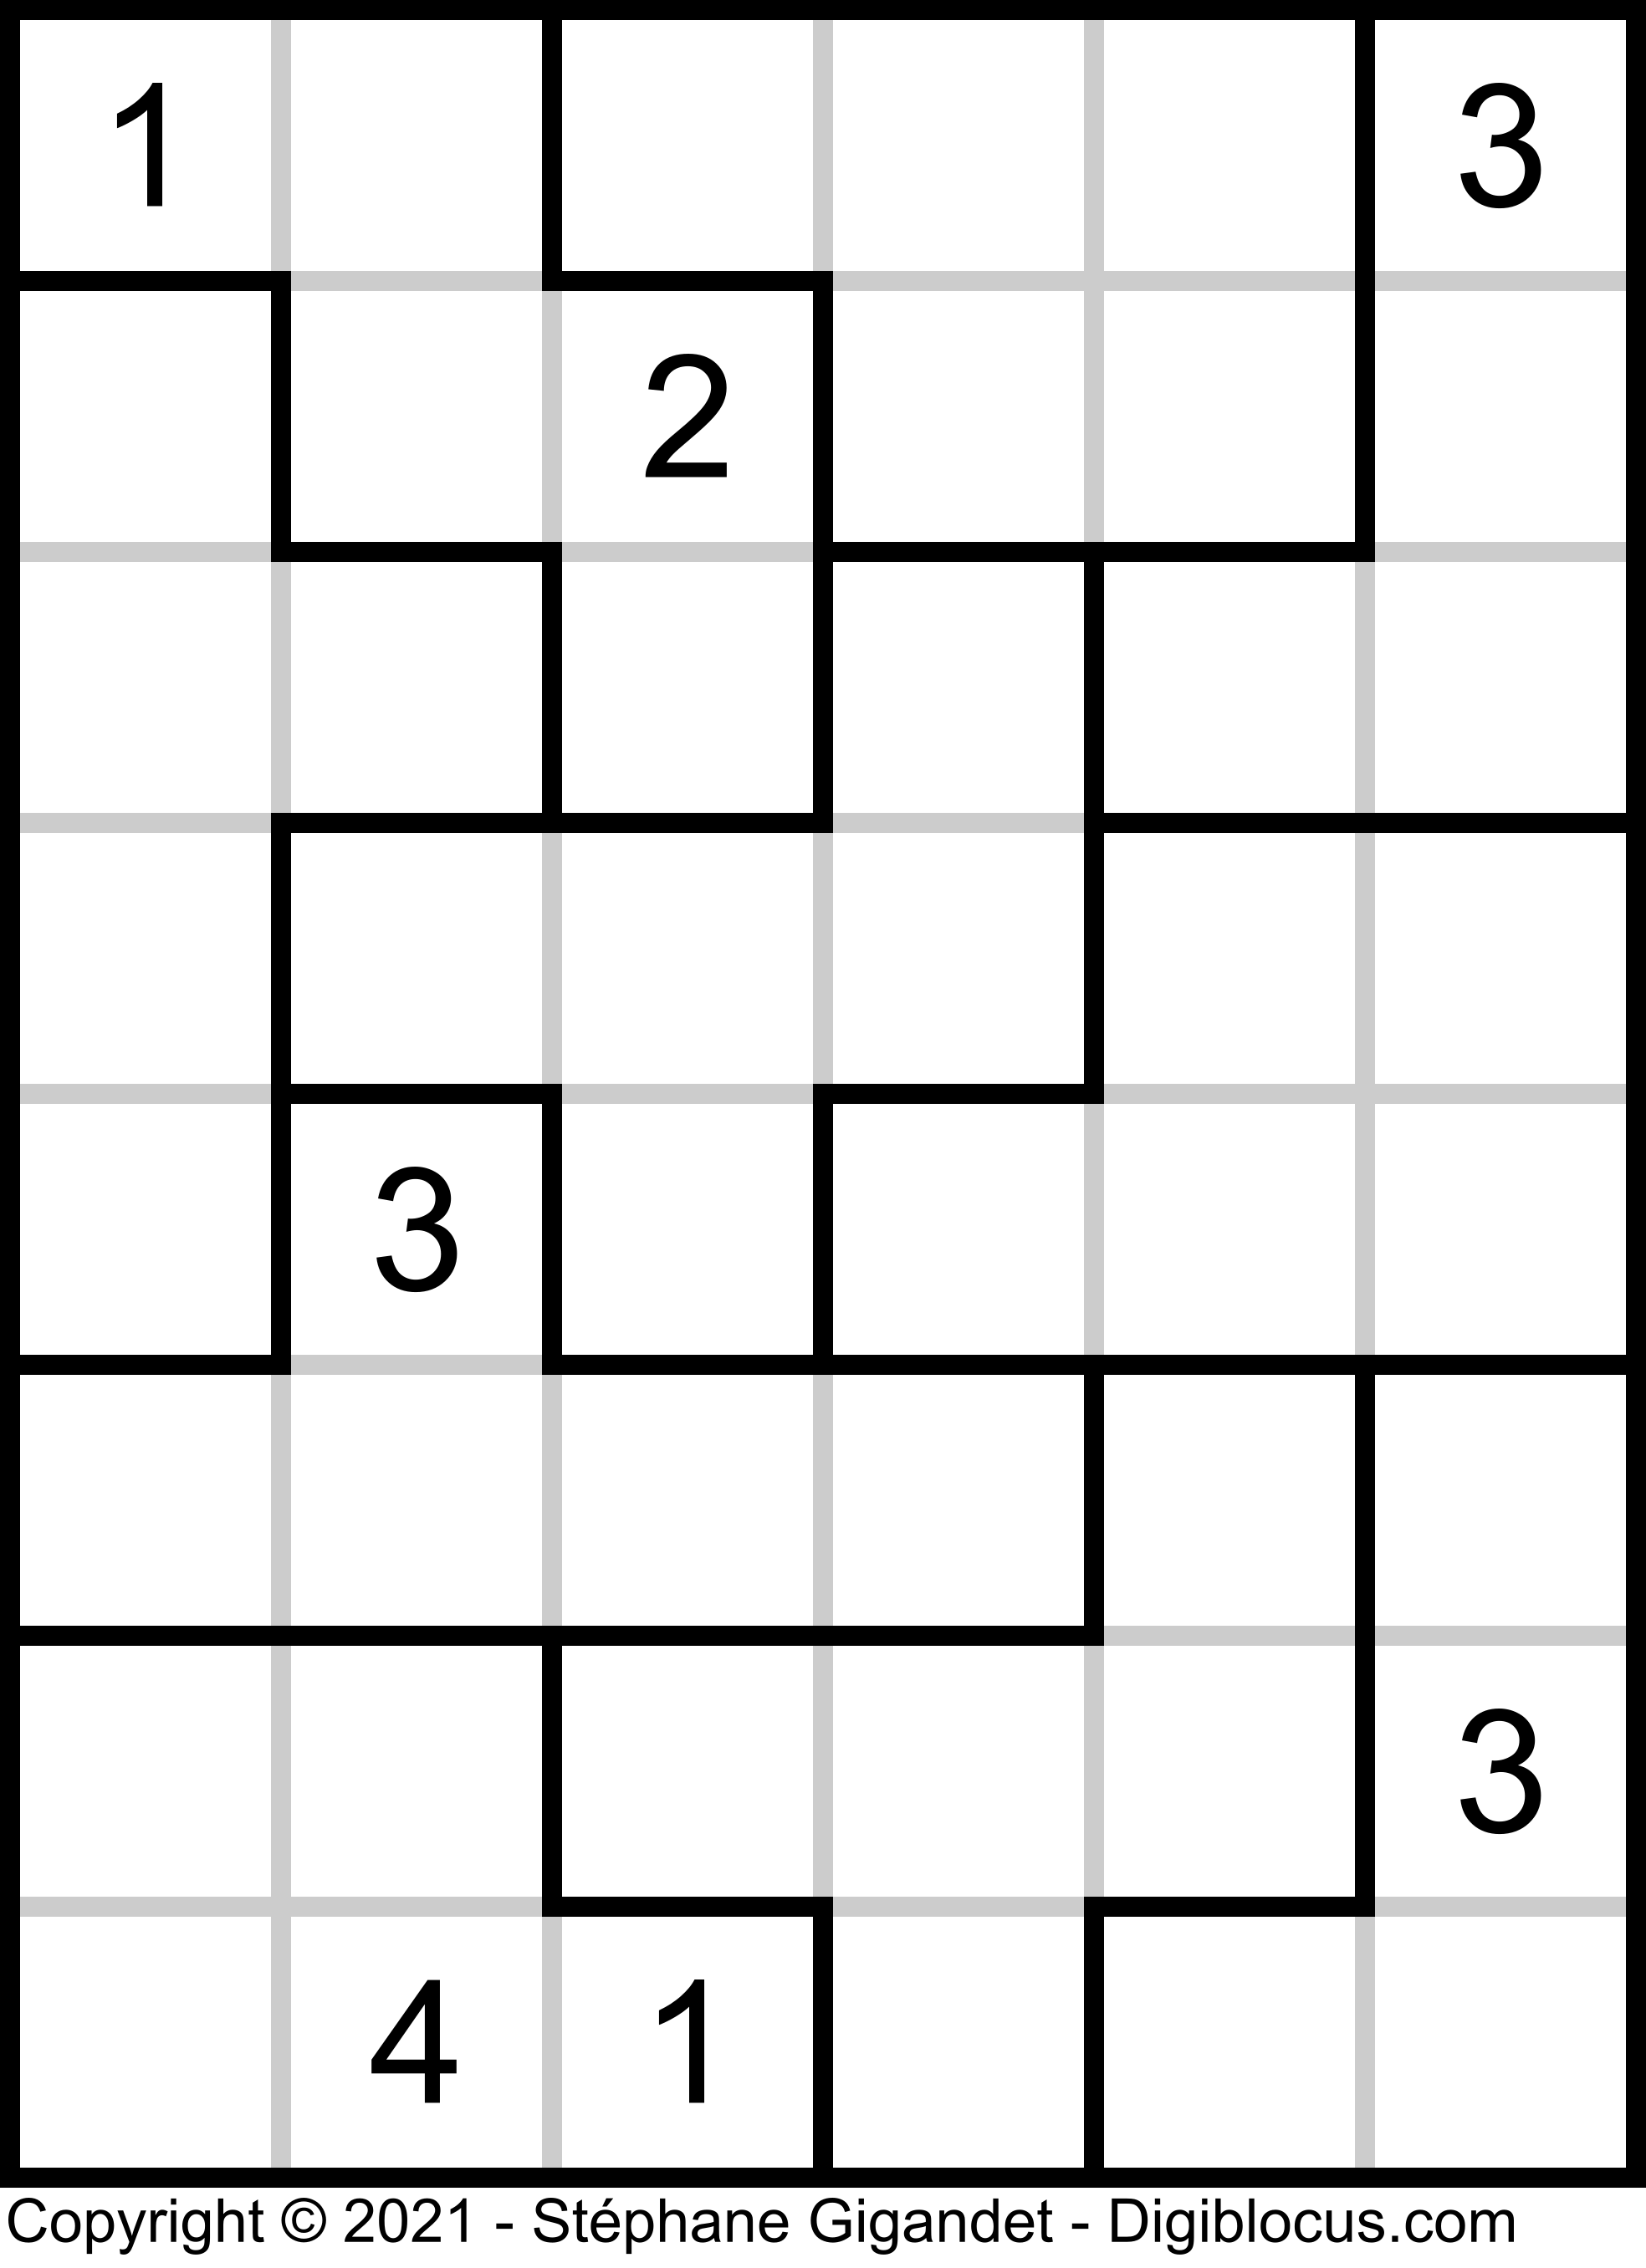 Printable Digiblocus game in black and white